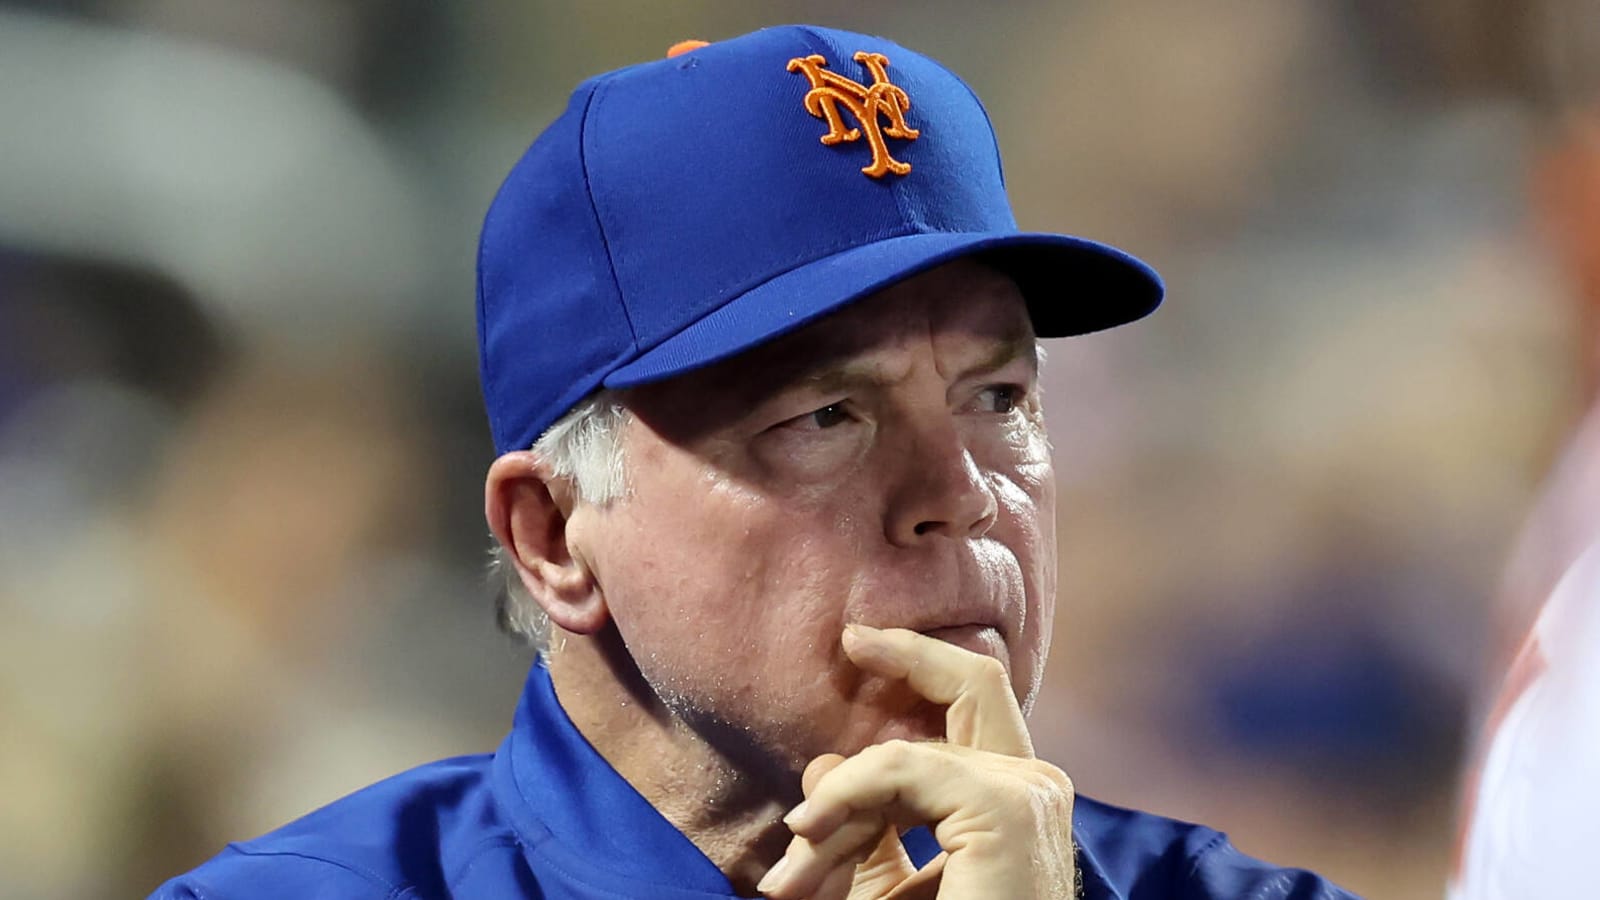 Watch: Mets broadcast goes ‘Kill Bill’ on Buck Showalter after hit-by-pitch